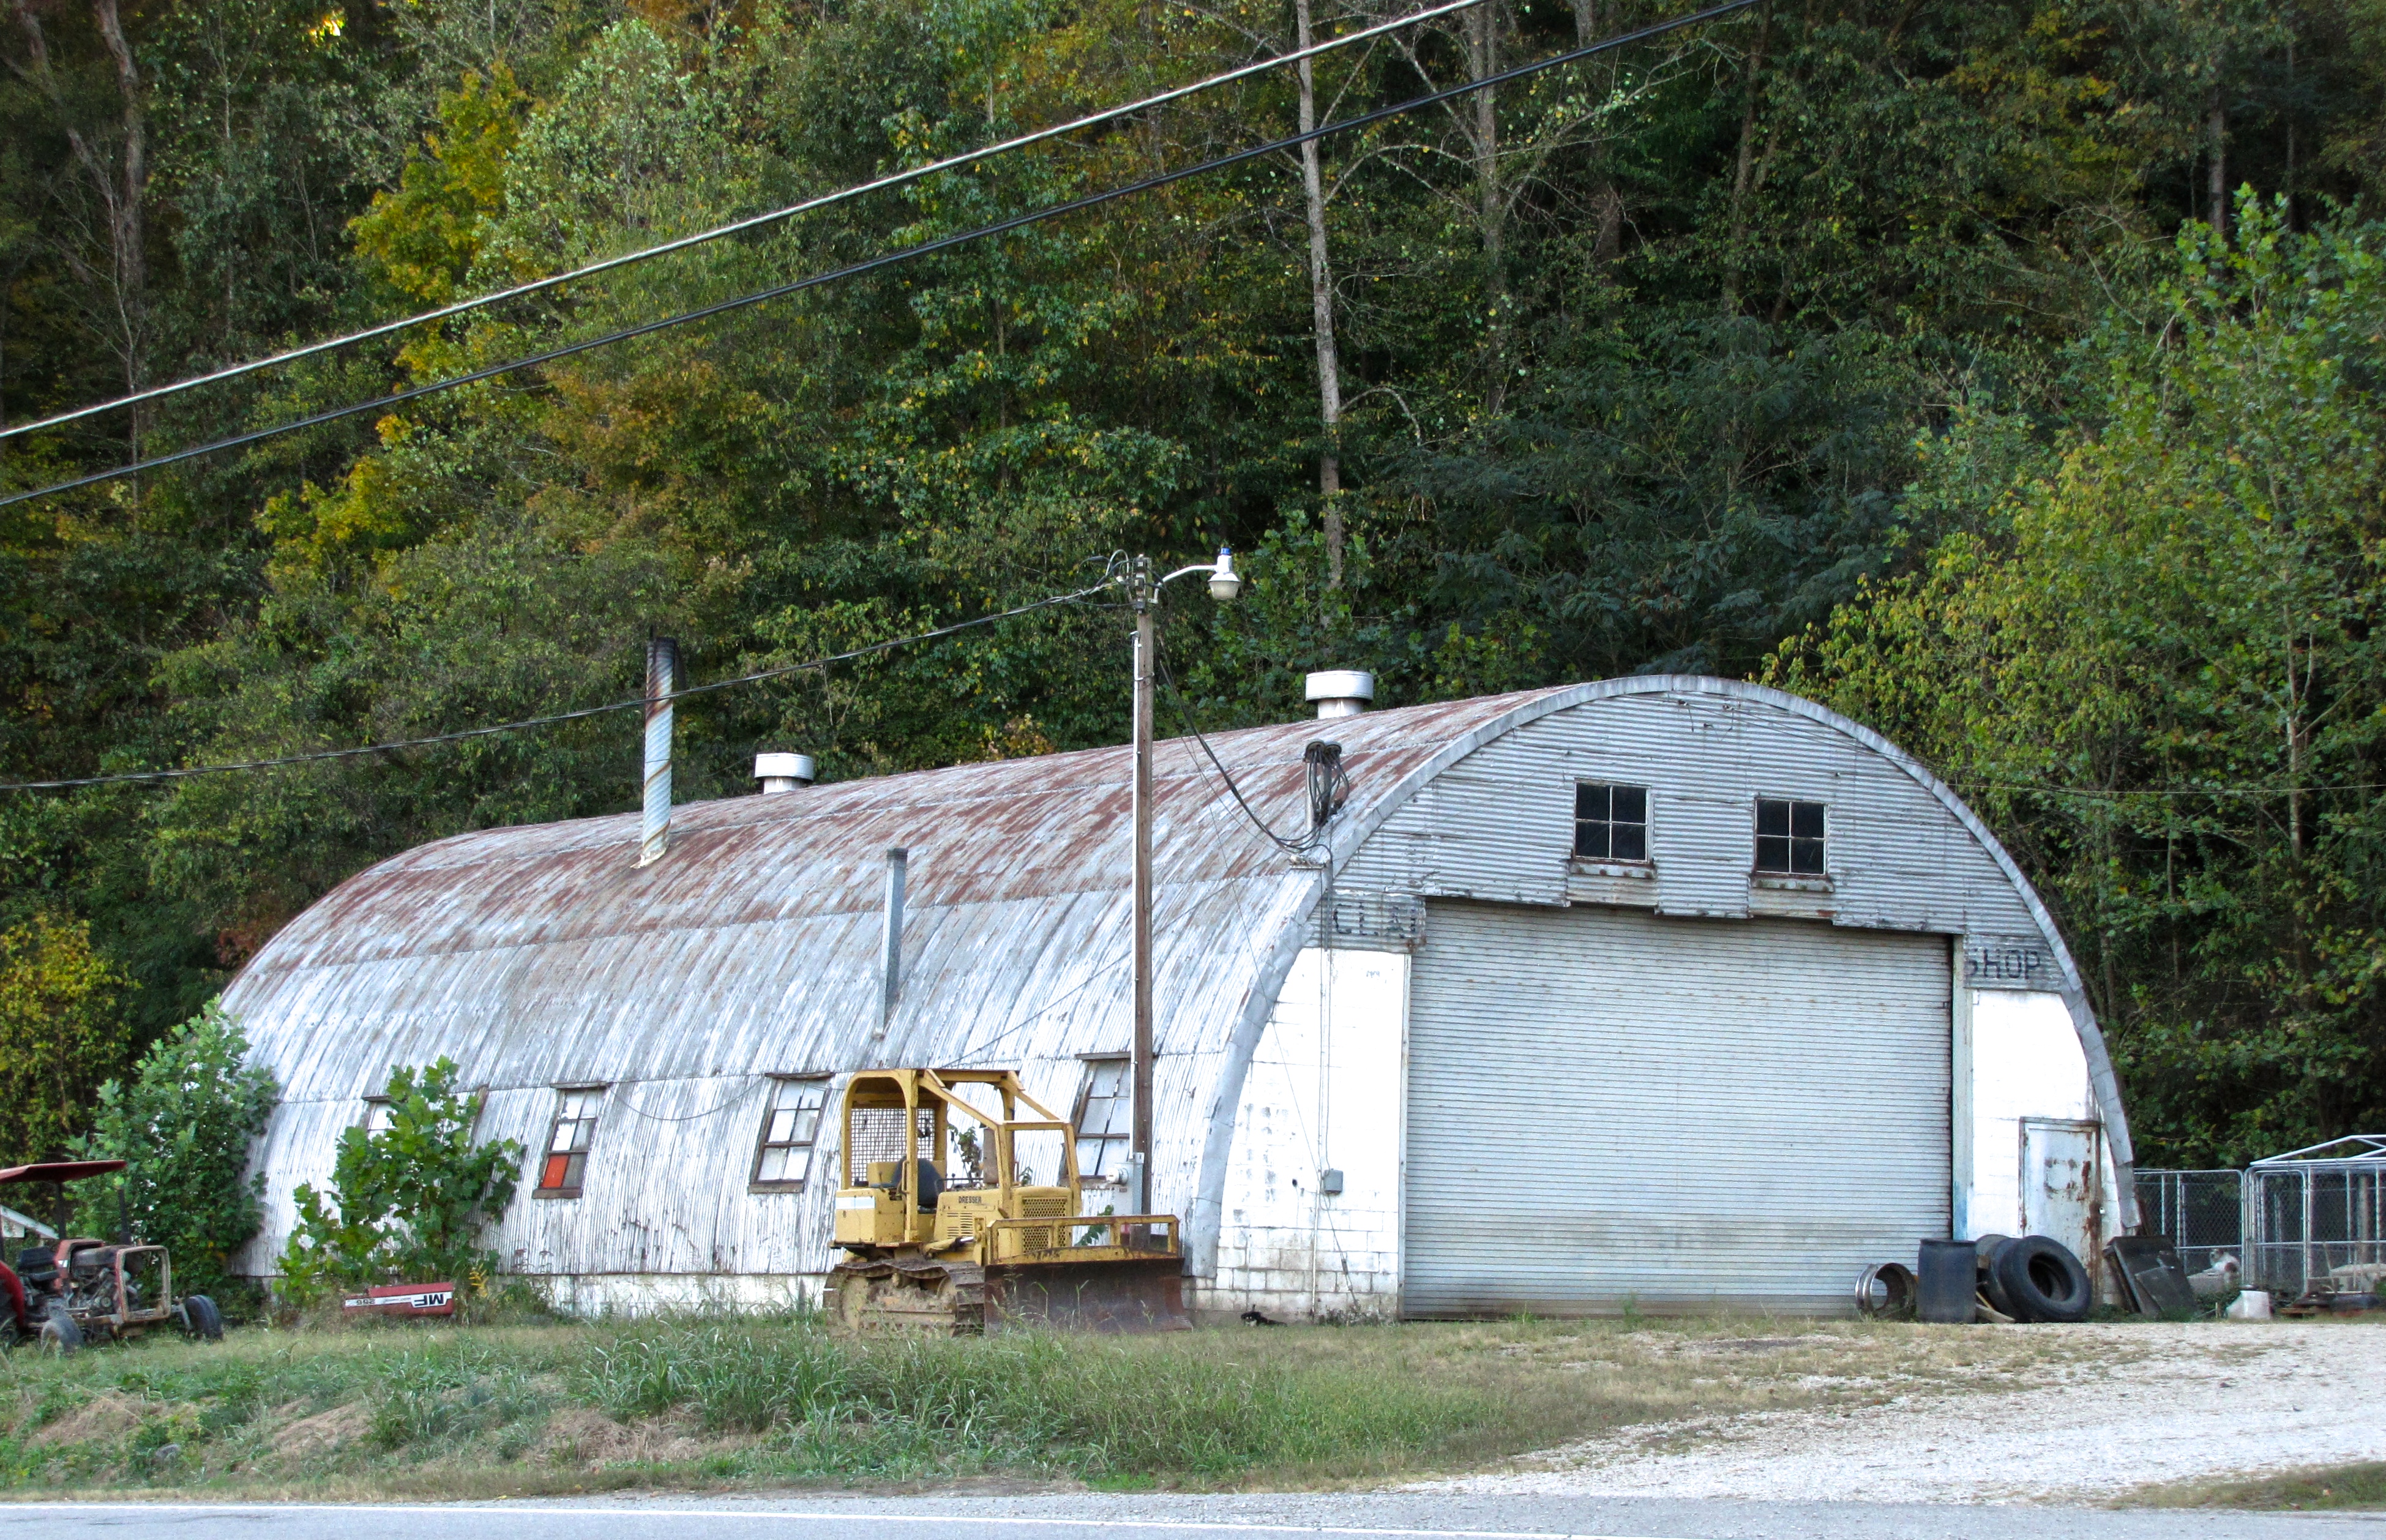 quonset hut in Greenwood, AR